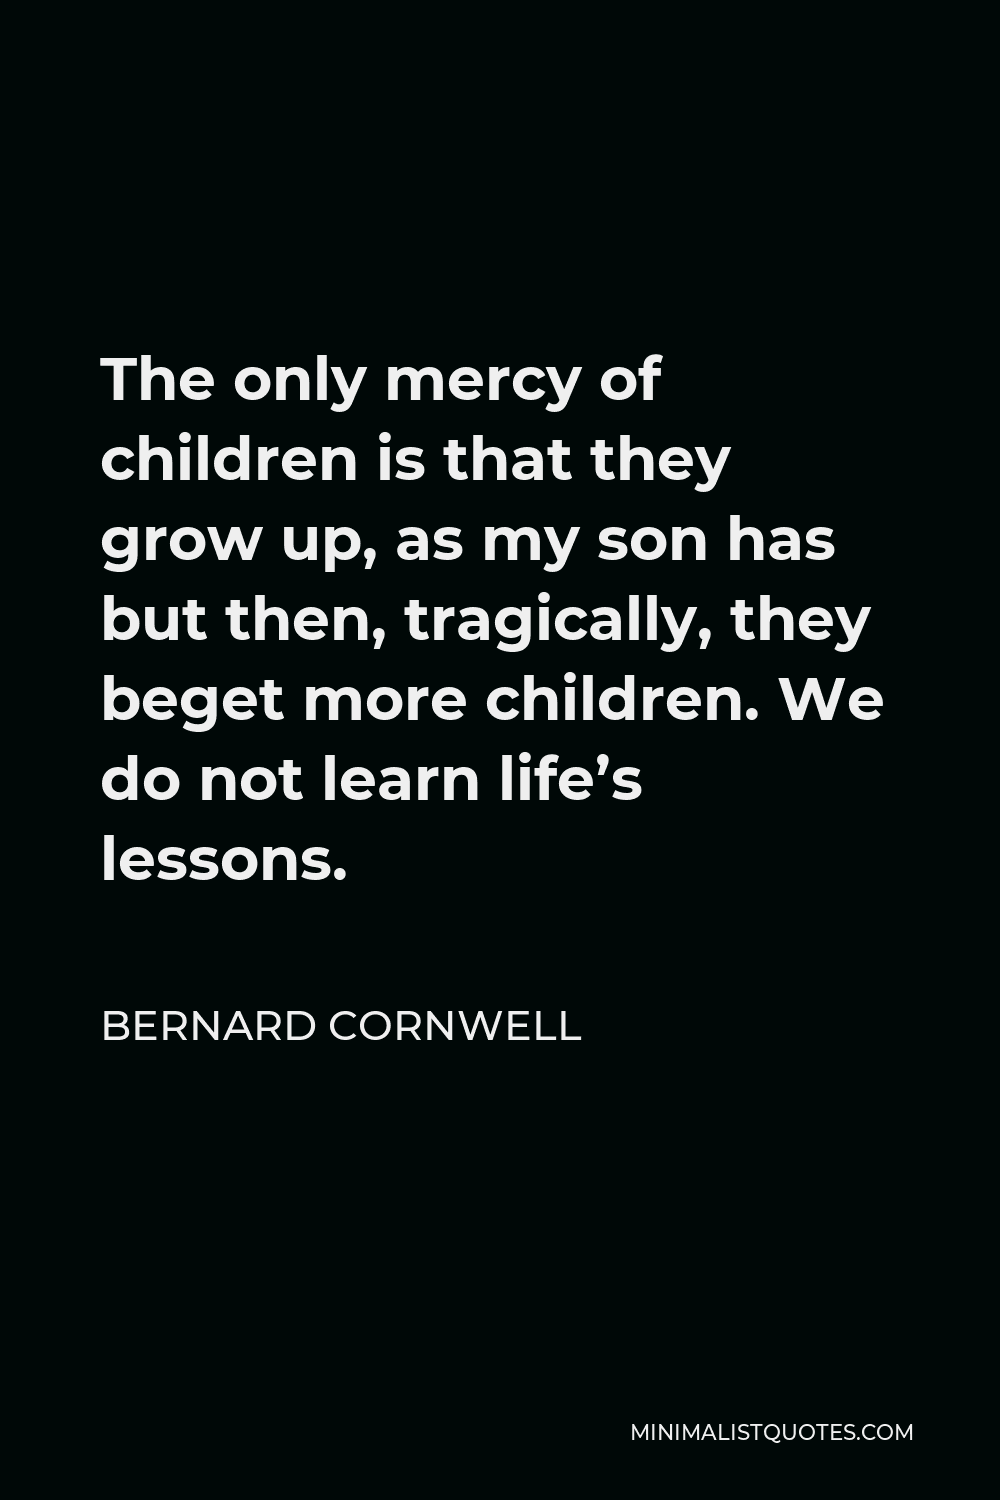 Bernard Cornwell Quote - The only mercy of children is that they grow up, as my son has but then, tragically, they beget more children. We do not learn life’s lessons.